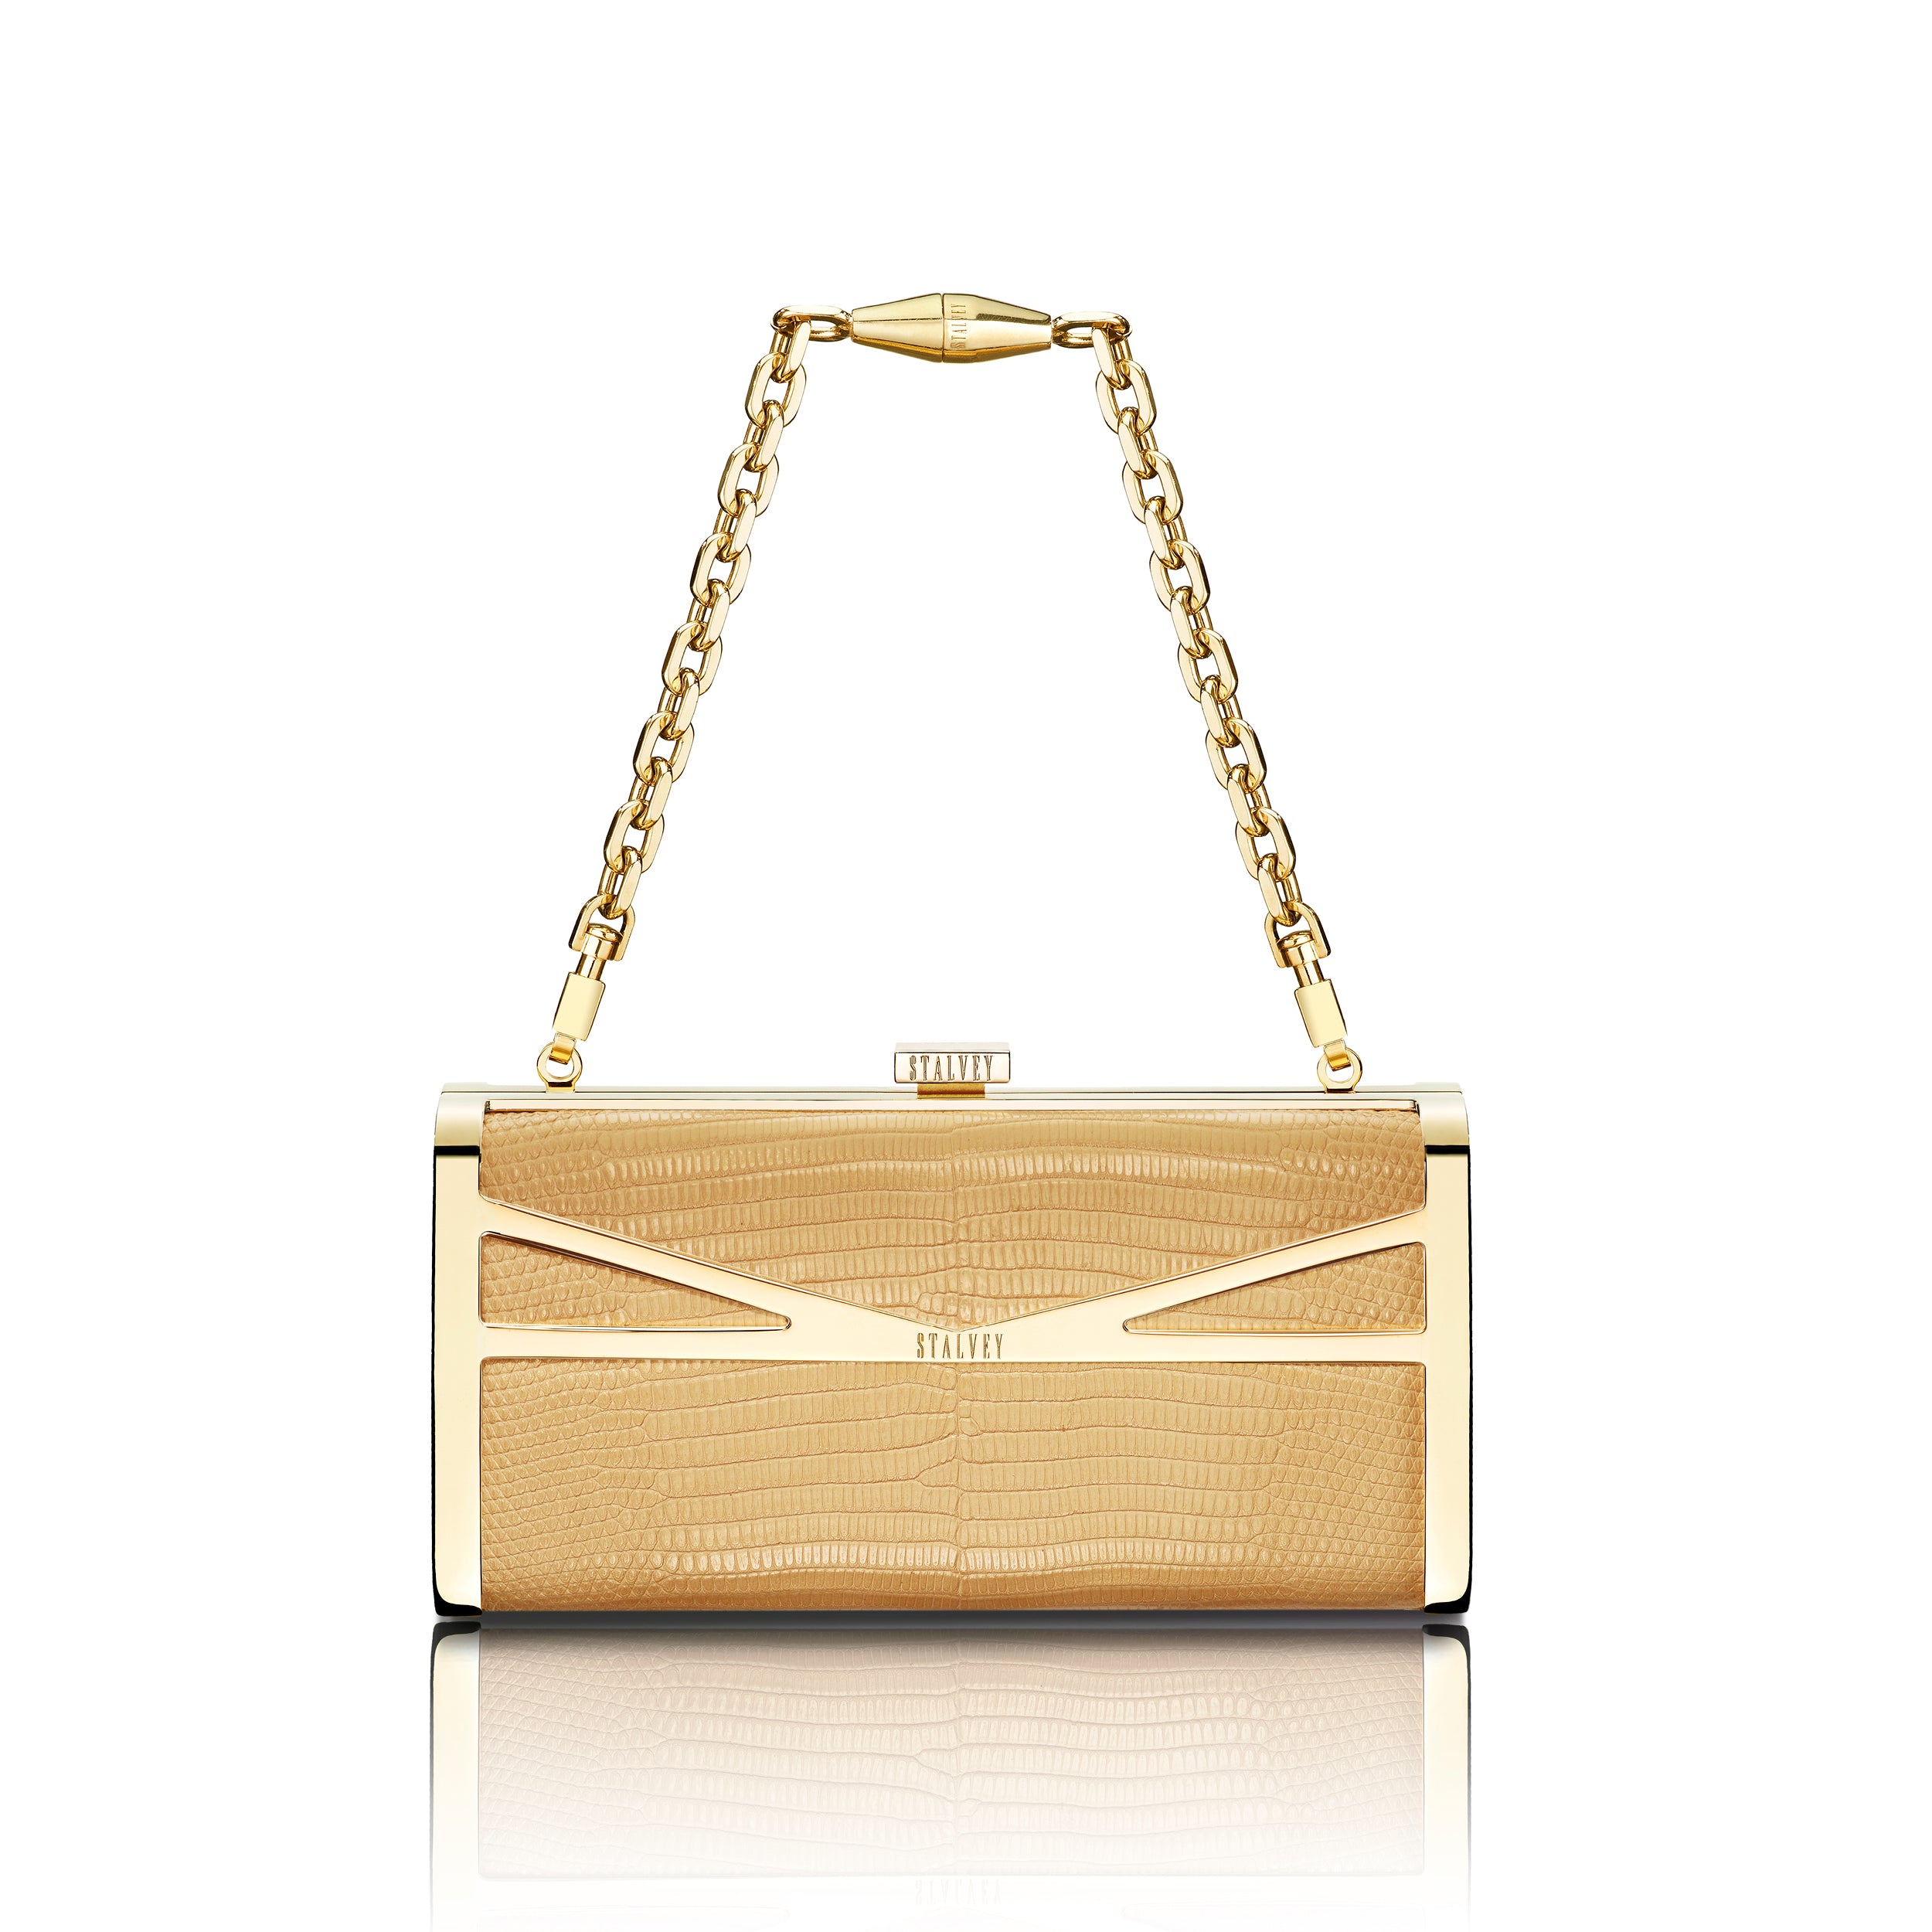 STALVEY Square Clutch in Sand Dune Lizard with 24kt Gold Hardware Front View with Chain